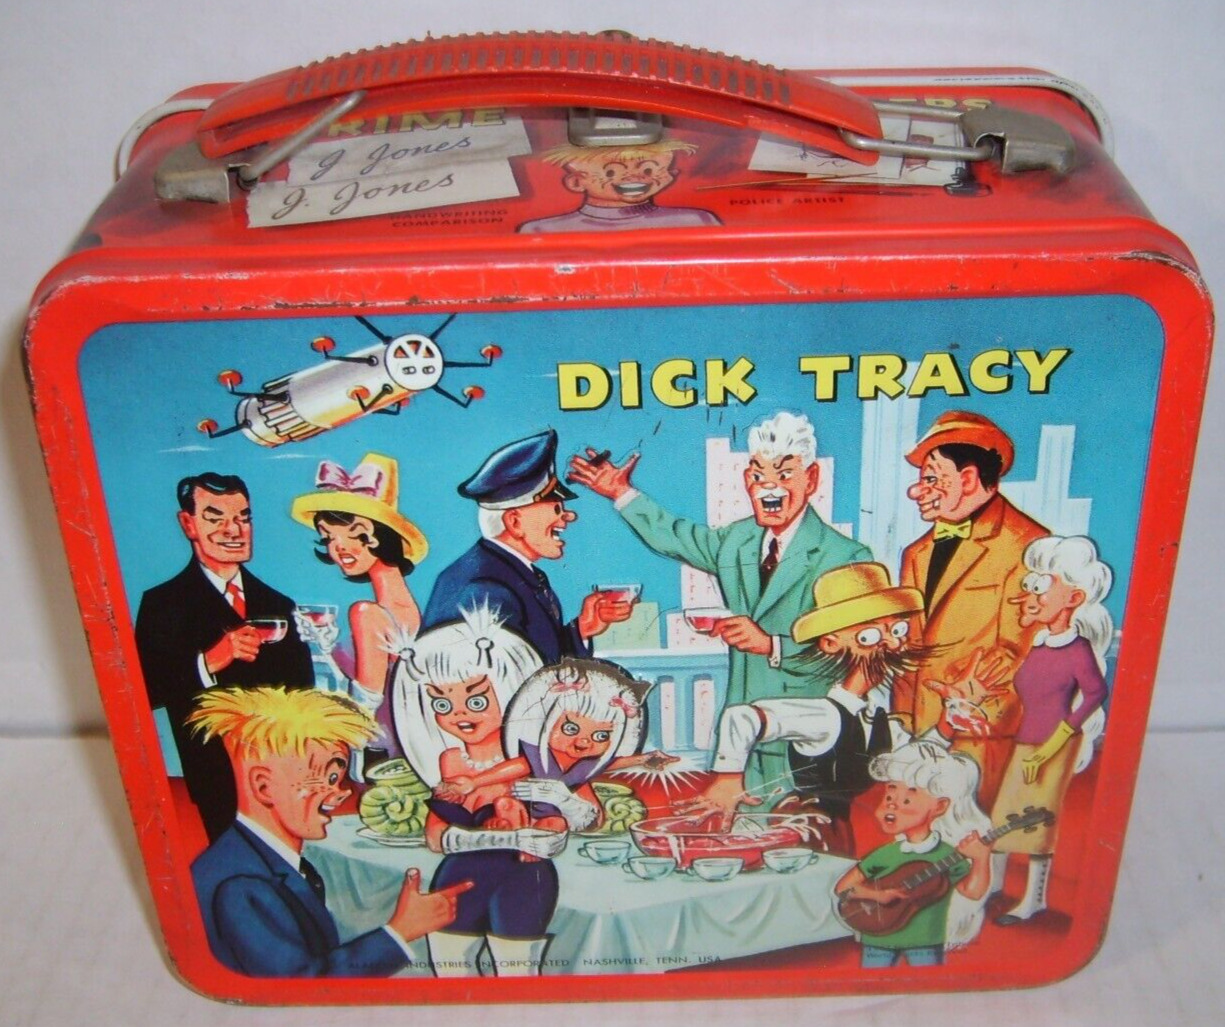 Vintage 1967 DICK TRACY ALLADDIN METAL LUNCH BOX - No Thermos